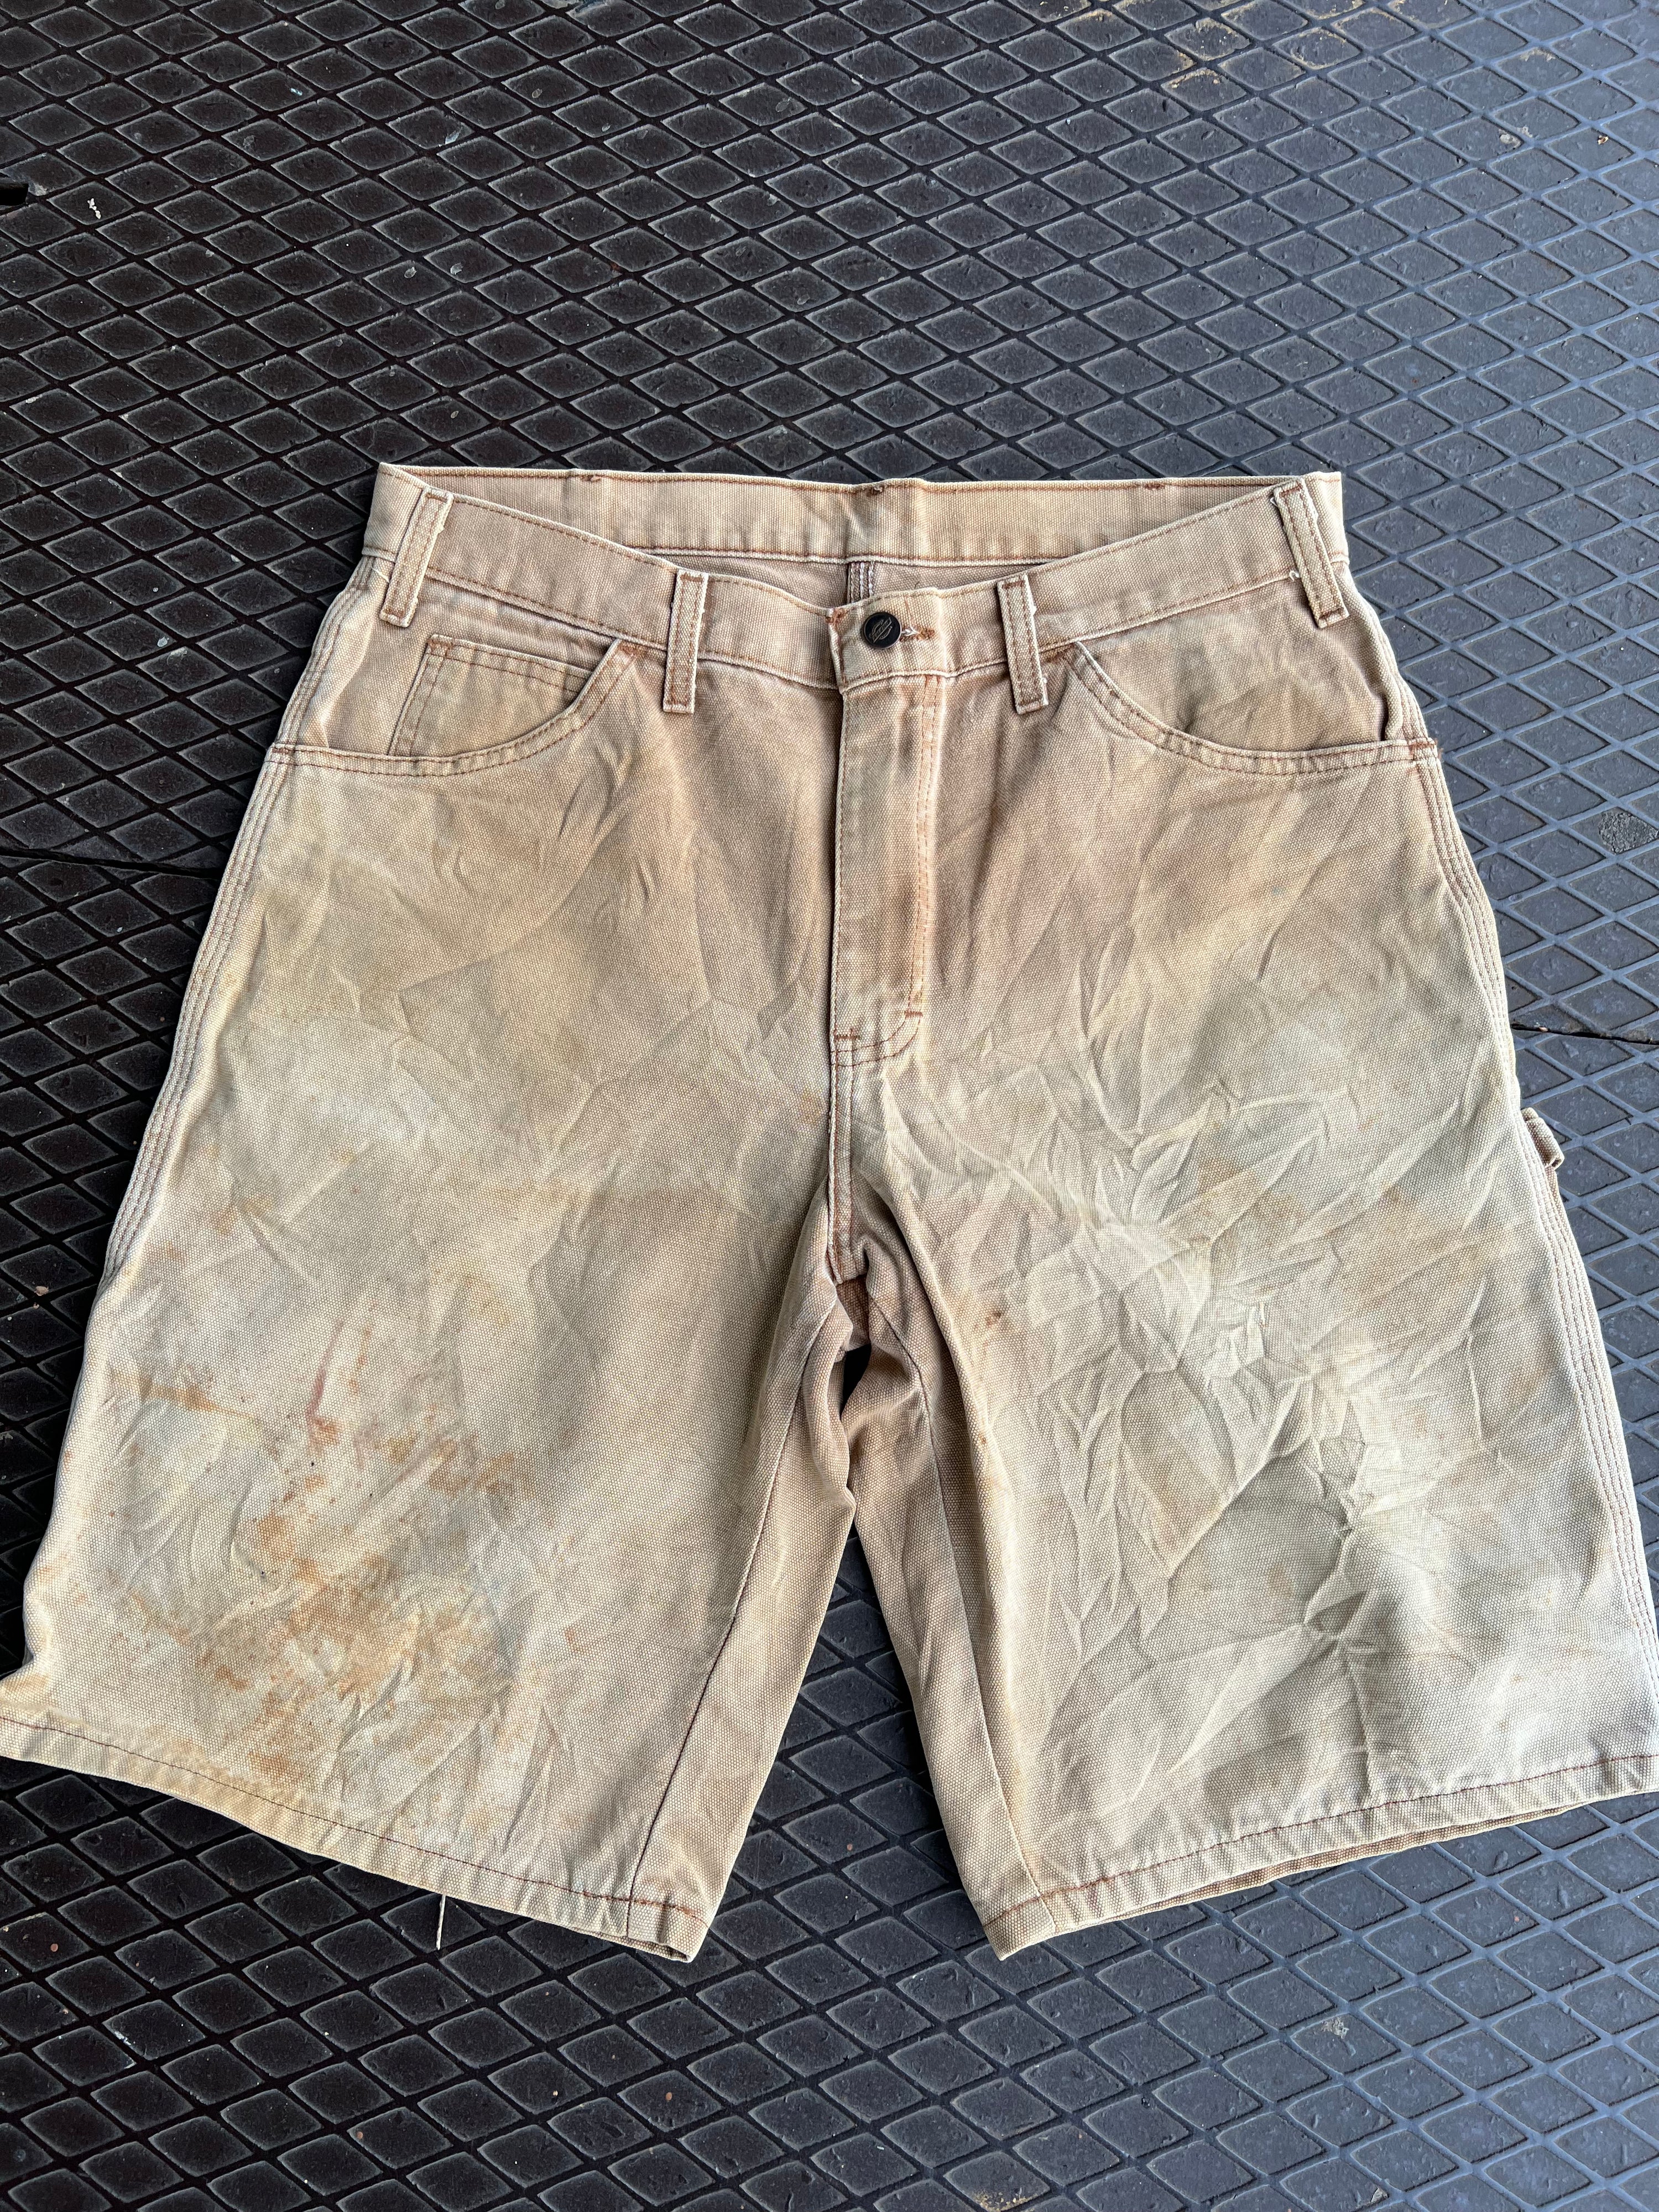 34 - Dickies Relaxed Fit Beige Carpenter Shorts